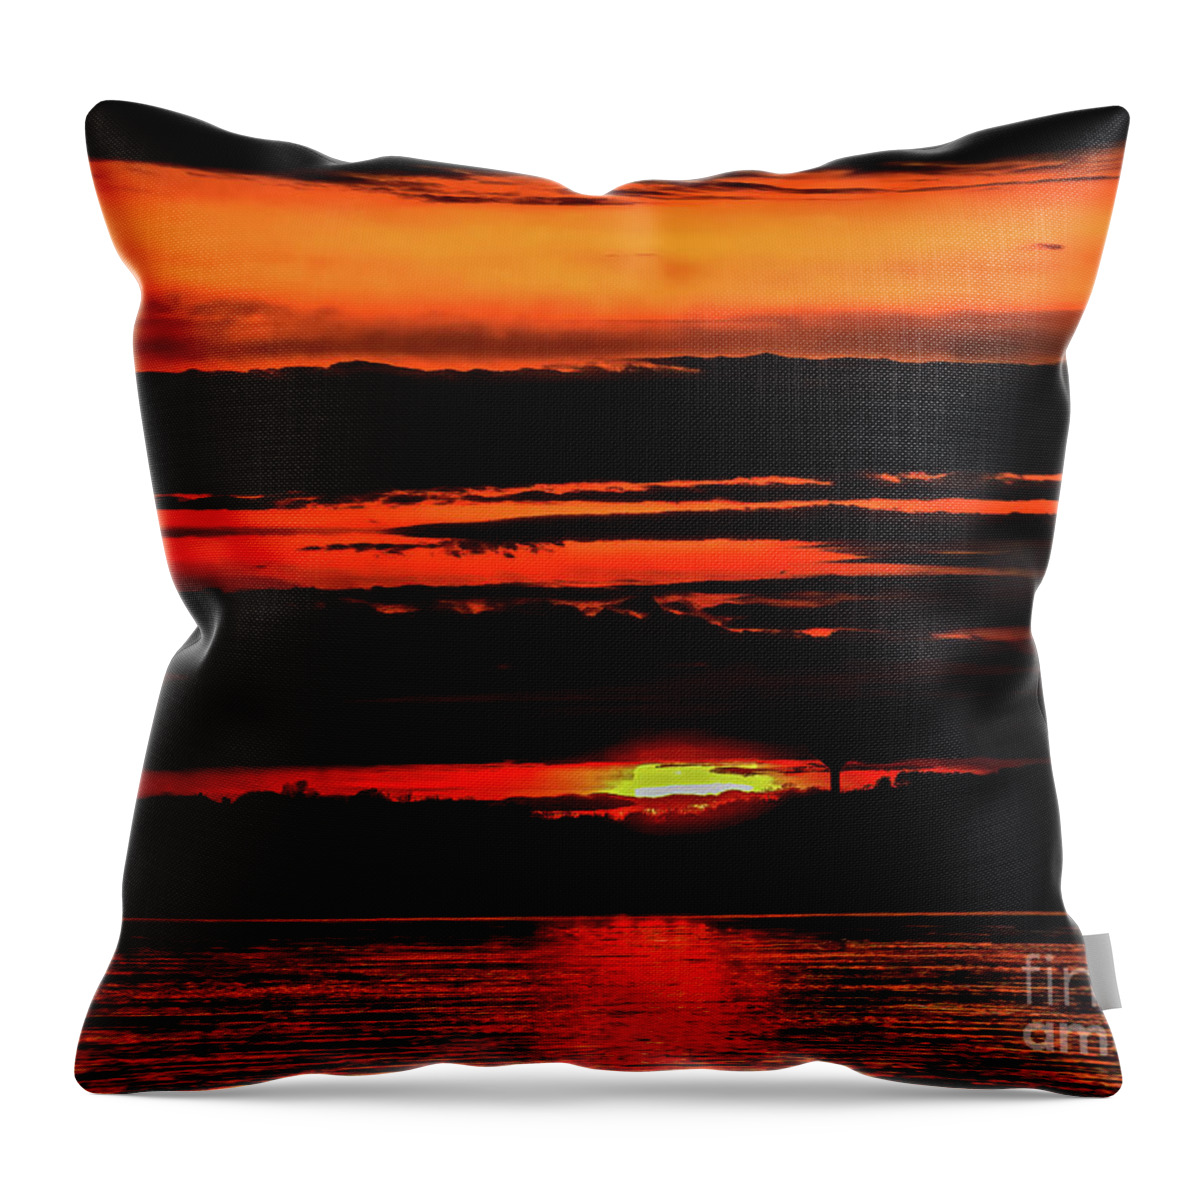 Digital Photography Throw Pillow featuring the photograph All A Glow by Eunice Miller